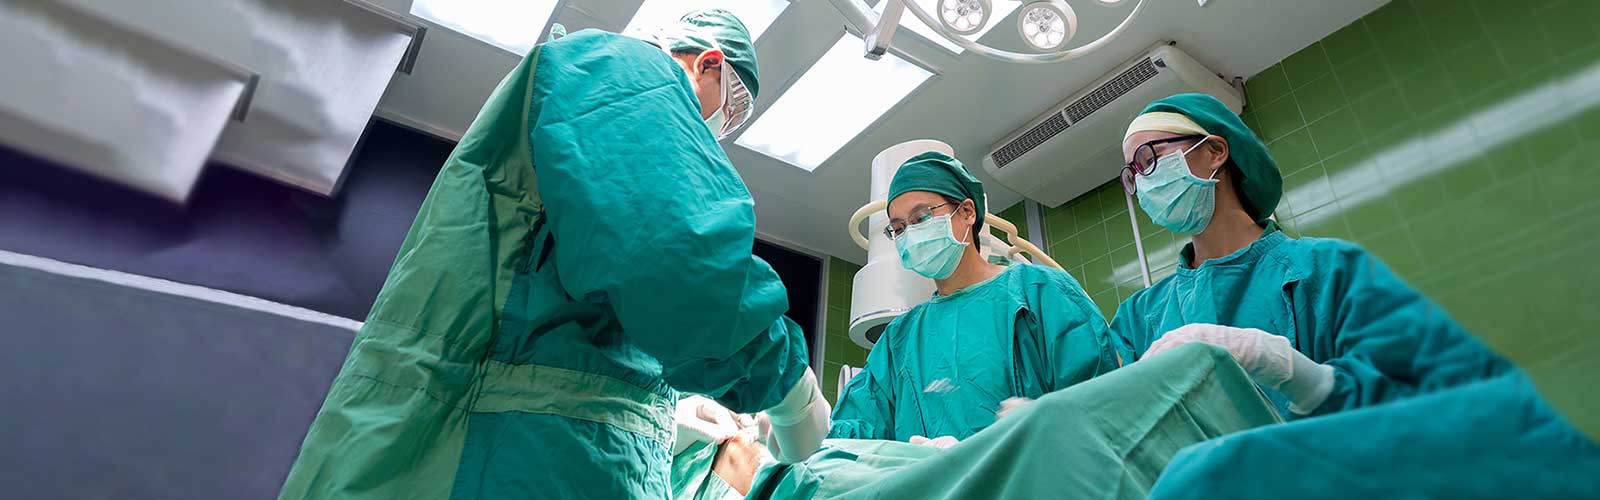 Orthopedic Surgery at Hospital for Special Surgery | HSS